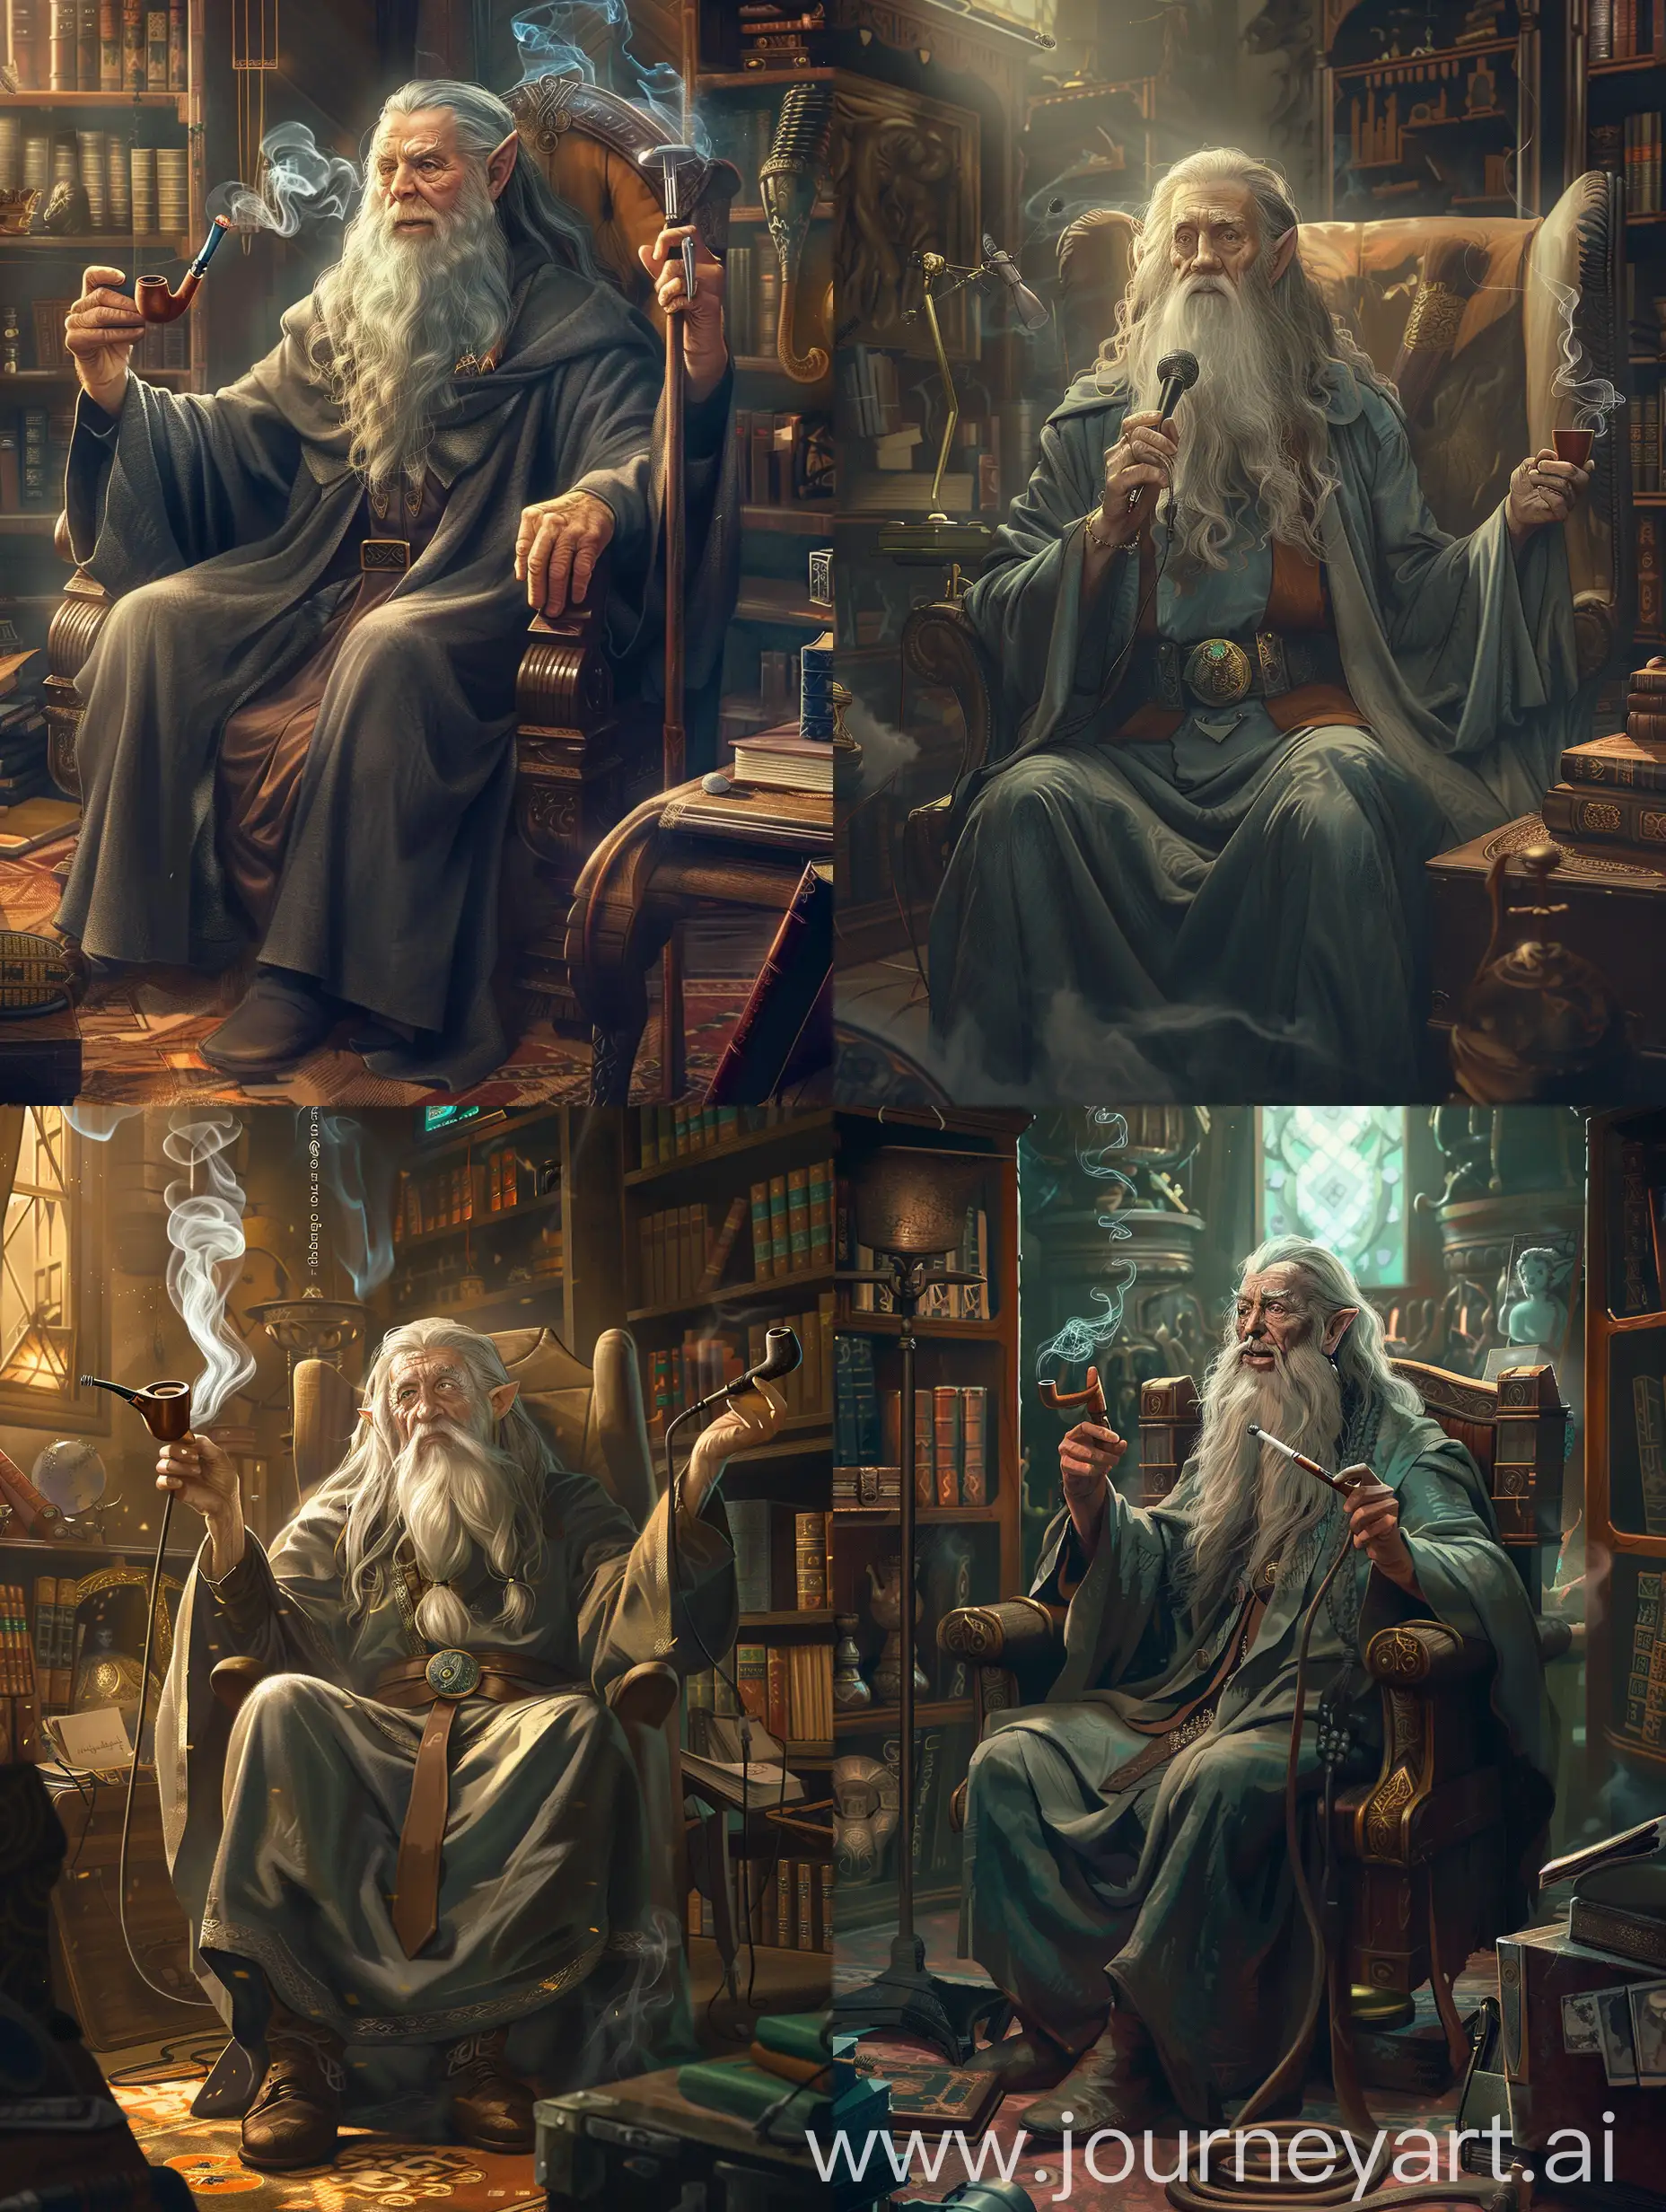 Generate an AI image portraying Gandalf from "The Lord of the Rings" universe hosting a podcast, embodying his wisdom and authority. Gandalf should be seated in a regal chair, draped in flowing robes and holding a microphone in one hand while smoking his pipe in the other. The scene should evoke a blend of ancient mysticism and modern technology, with subtle hints of magic in the air. Gandalf's expression should exude serenity and knowledge as he imparts his wisdom to an unseen audience, surrounded by shelves of ancient tomes and mystical artifacts, creating a captivating atmosphere for his podcast broadcast.